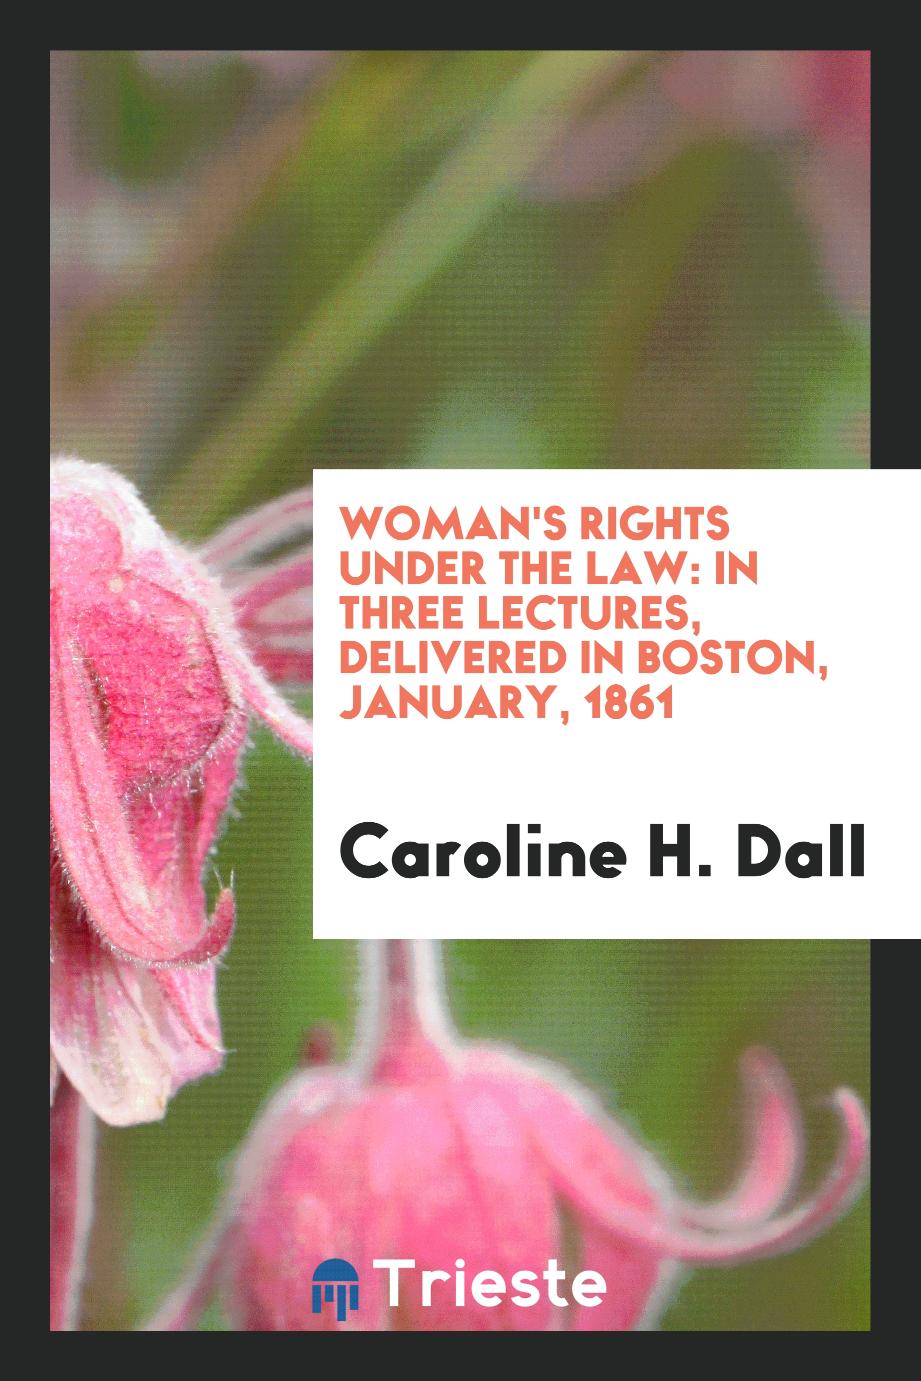 Woman's rights under the law: in three lectures, delivered in Boston, January, 1861